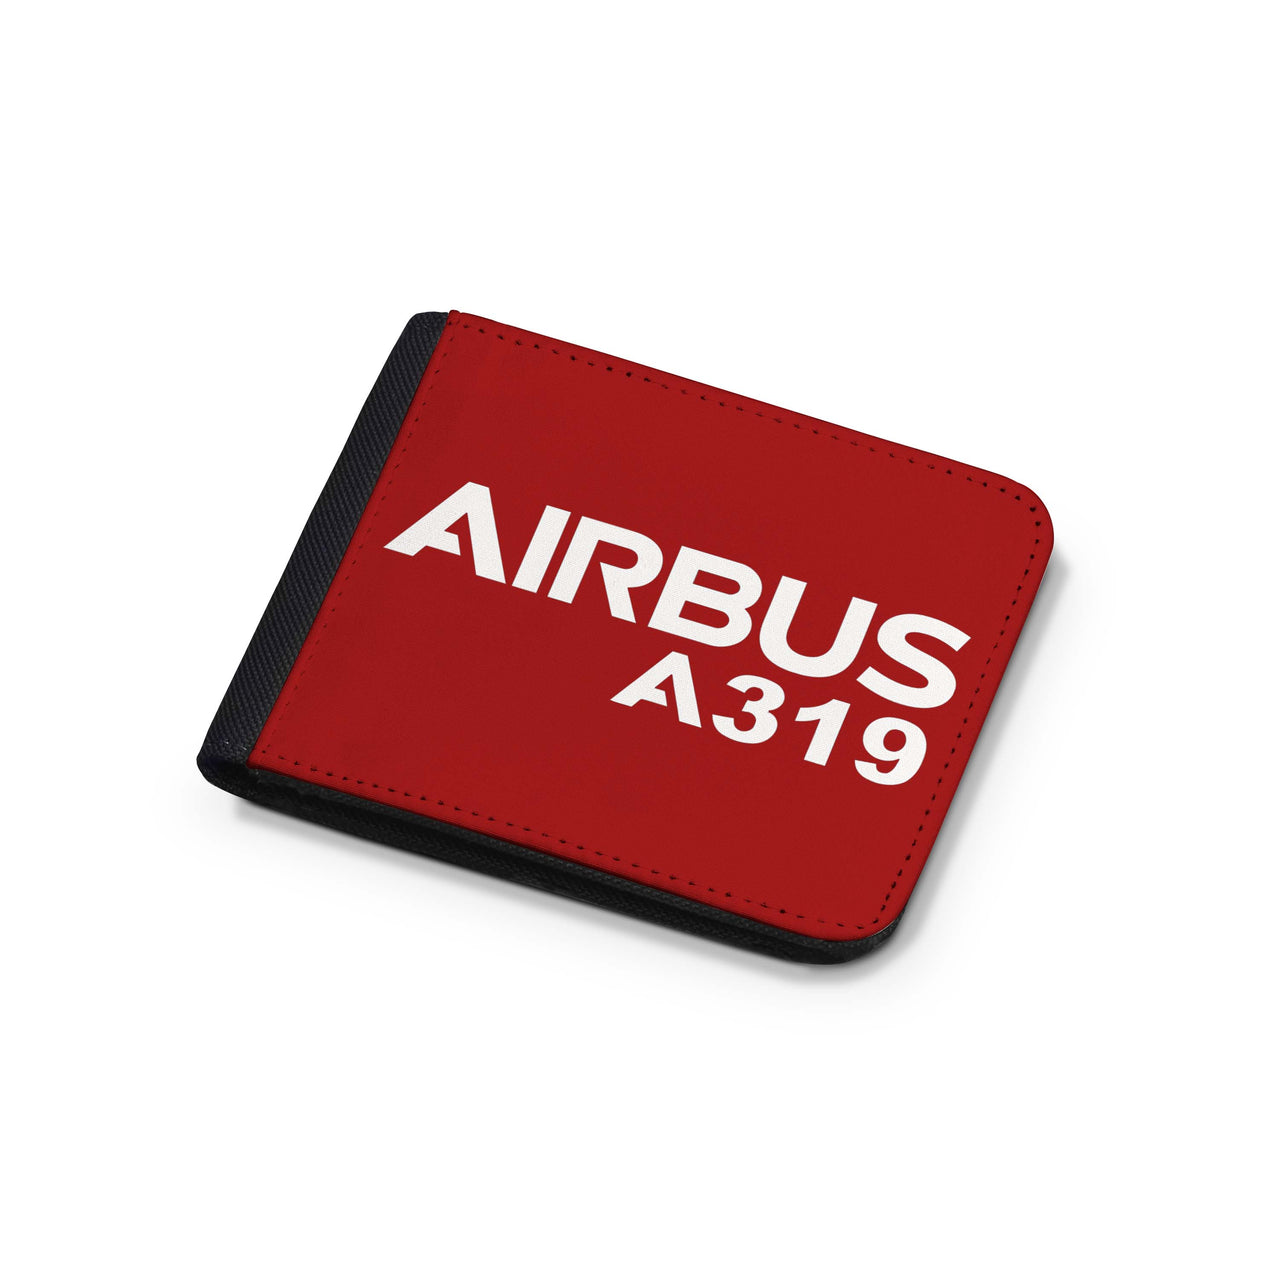 Airbus A319 & Text Designed Wallets